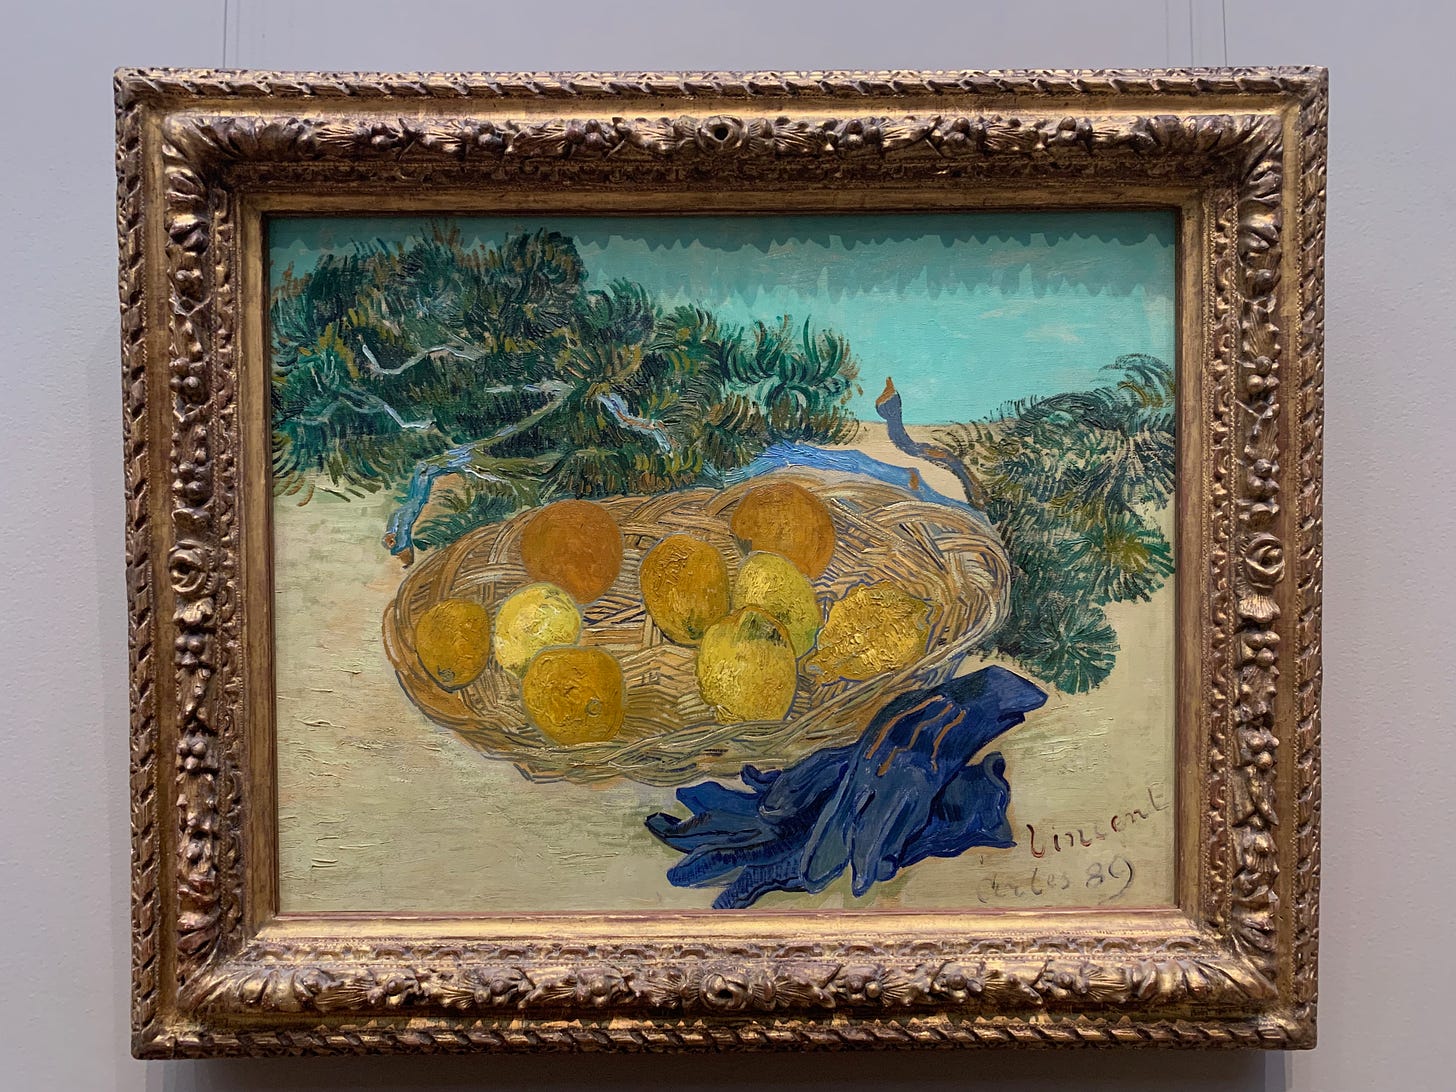 Van Gogh’s Still Life of Oranges and Lemons with Blue Gloves.